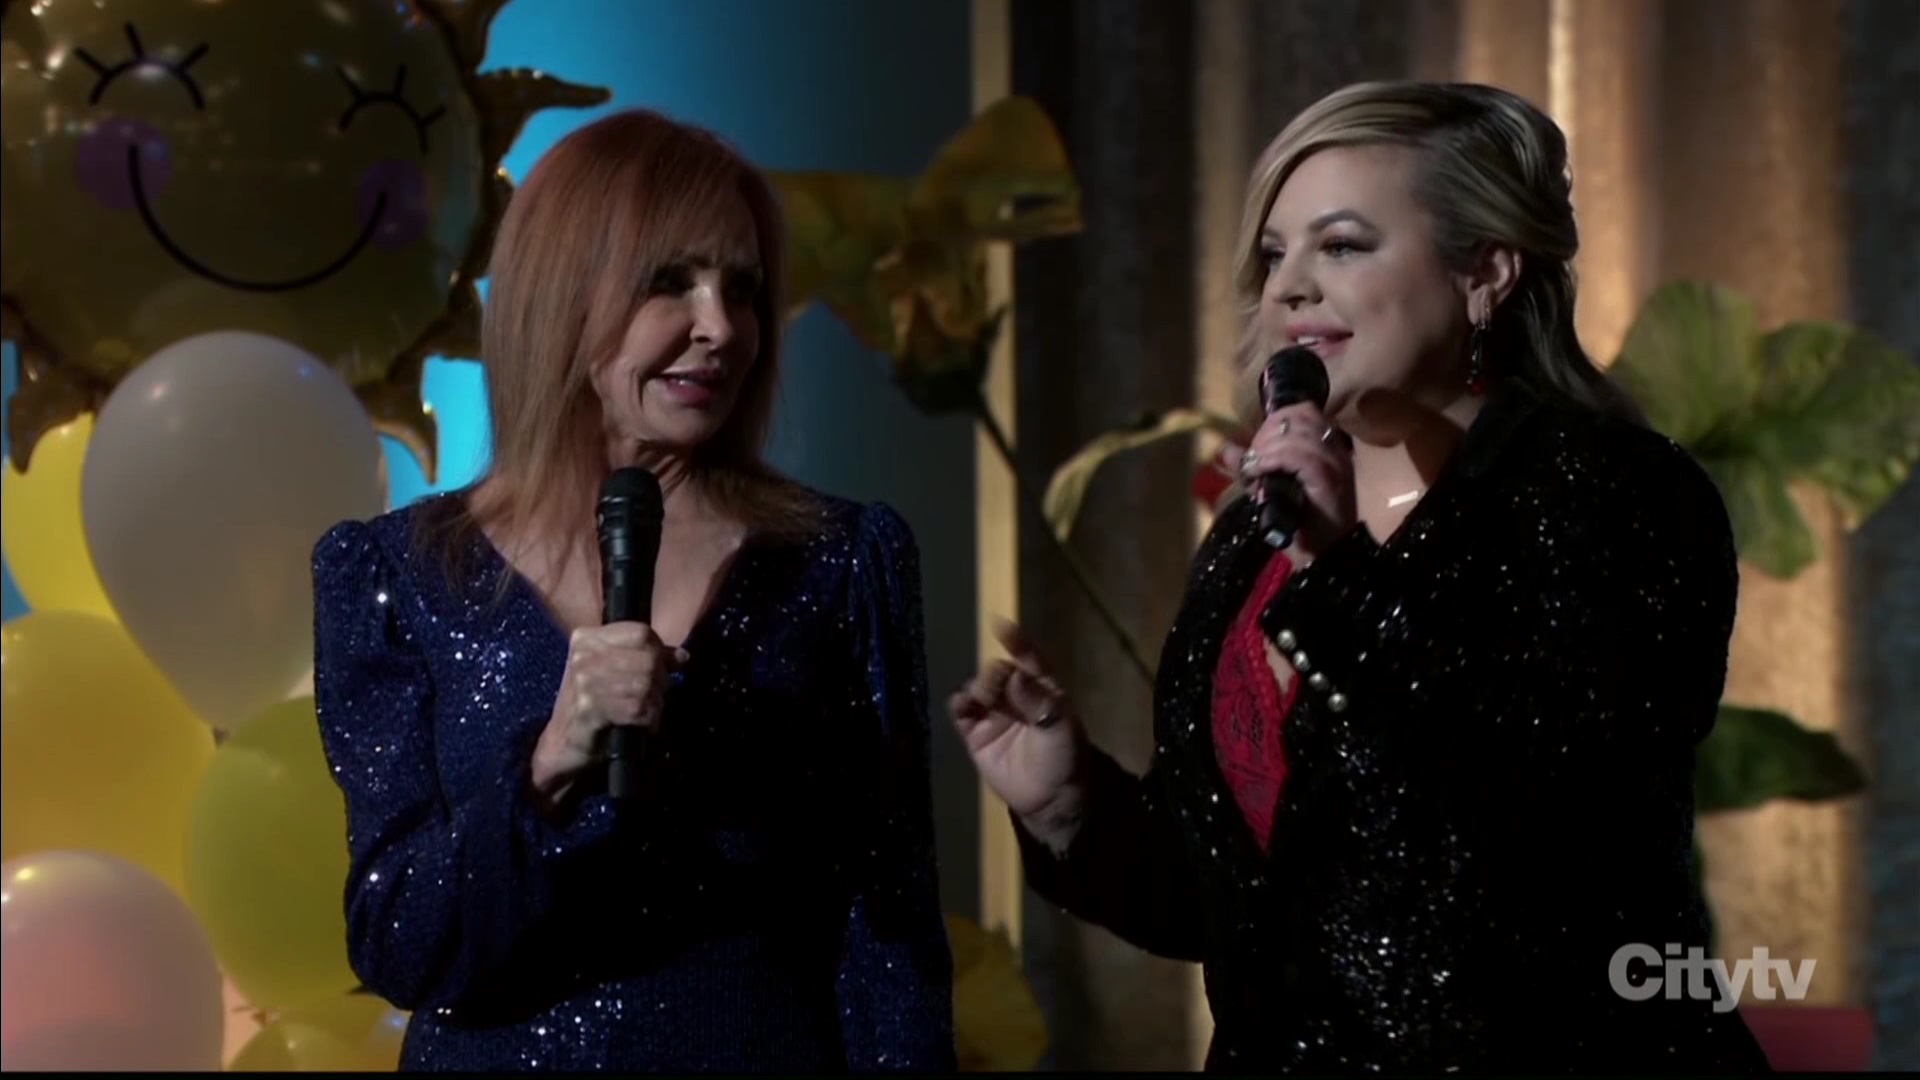 maxie and bobbie announce the first singing and dancing group at the nurses ball